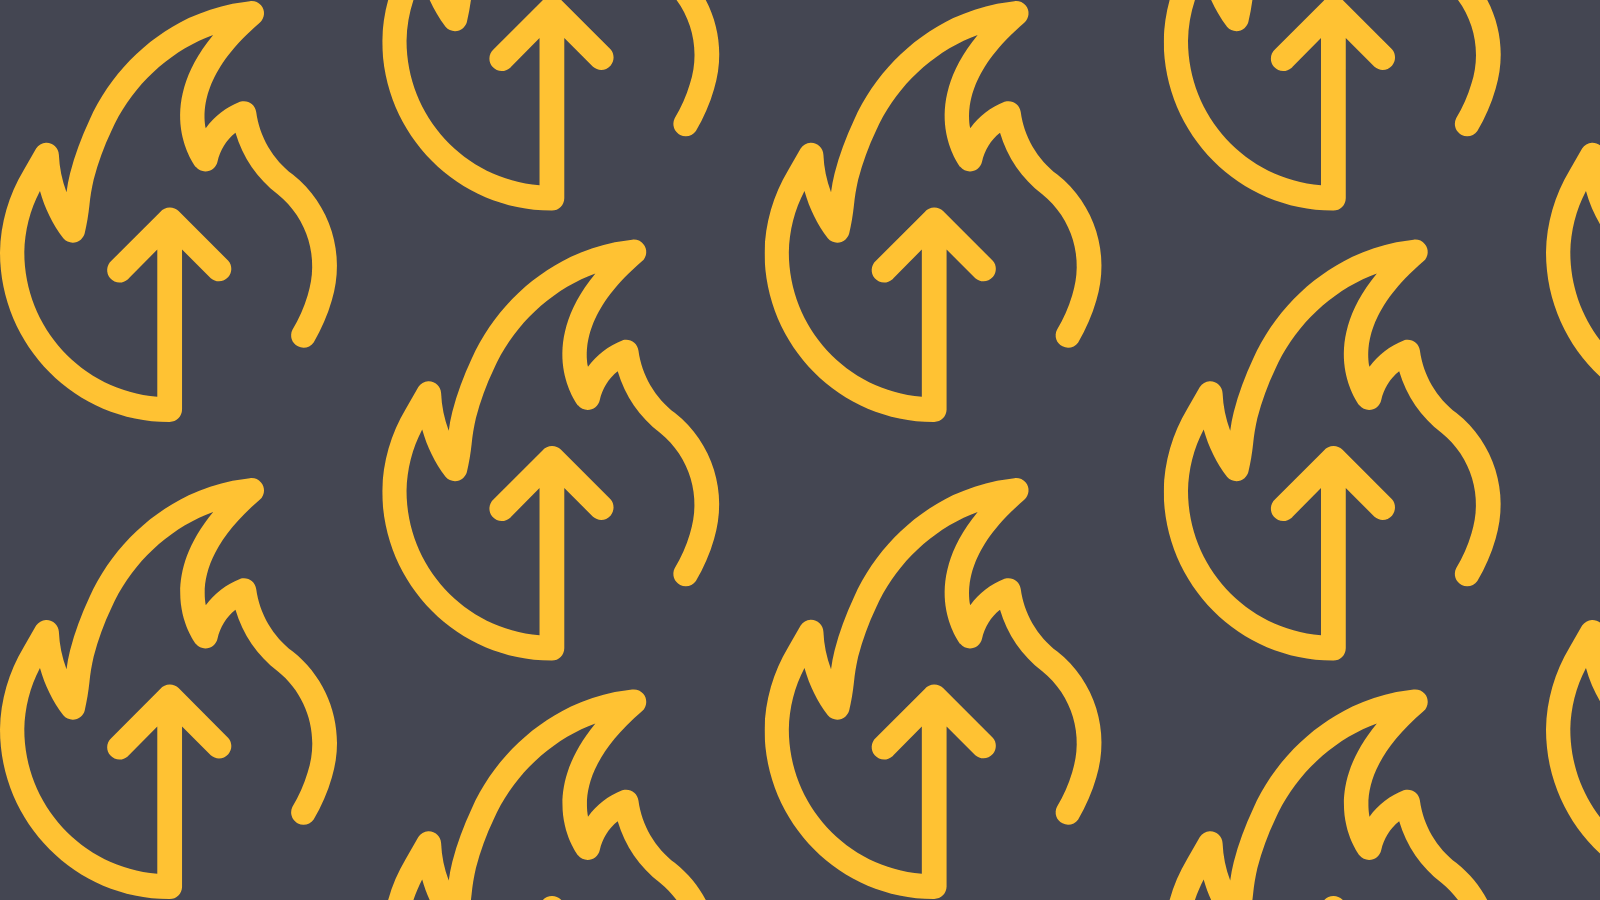 Icons of a flame with an arrow pointing up in a repeating pattern